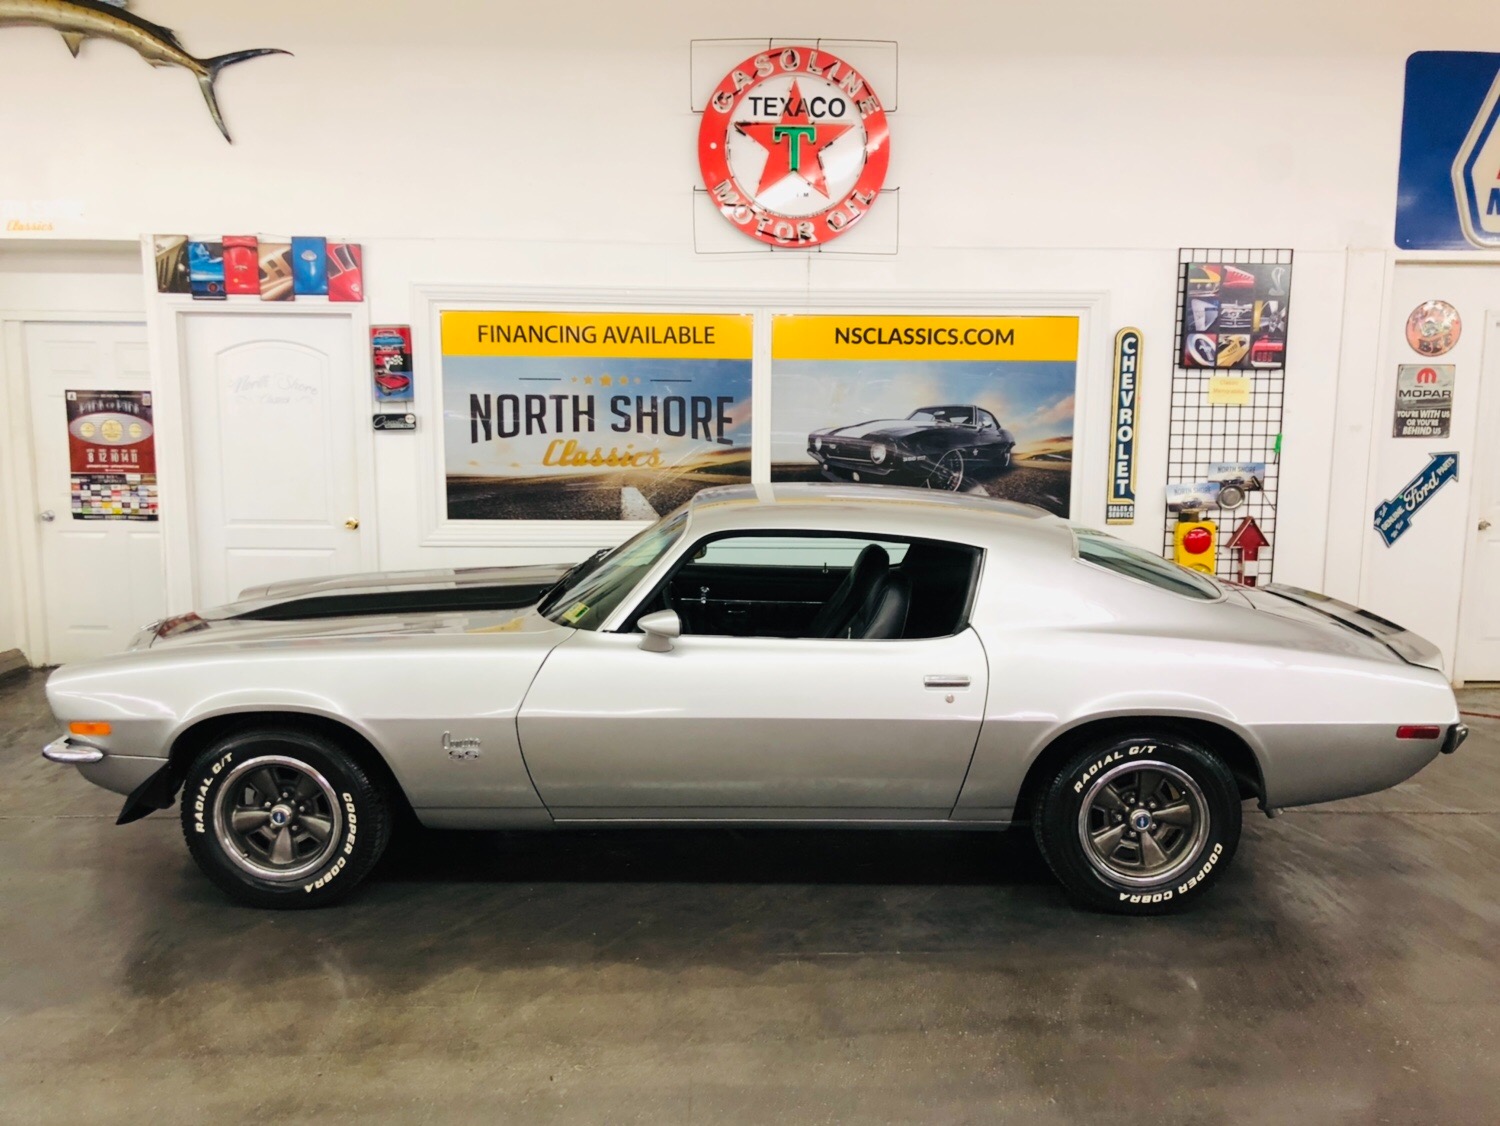 Used 1972 Chevrolet Camaro - SS TRIBUTE - 383 STROKER ENGINE - 700R4 TRANS - SEE VIDEO - | Mundelein, IL